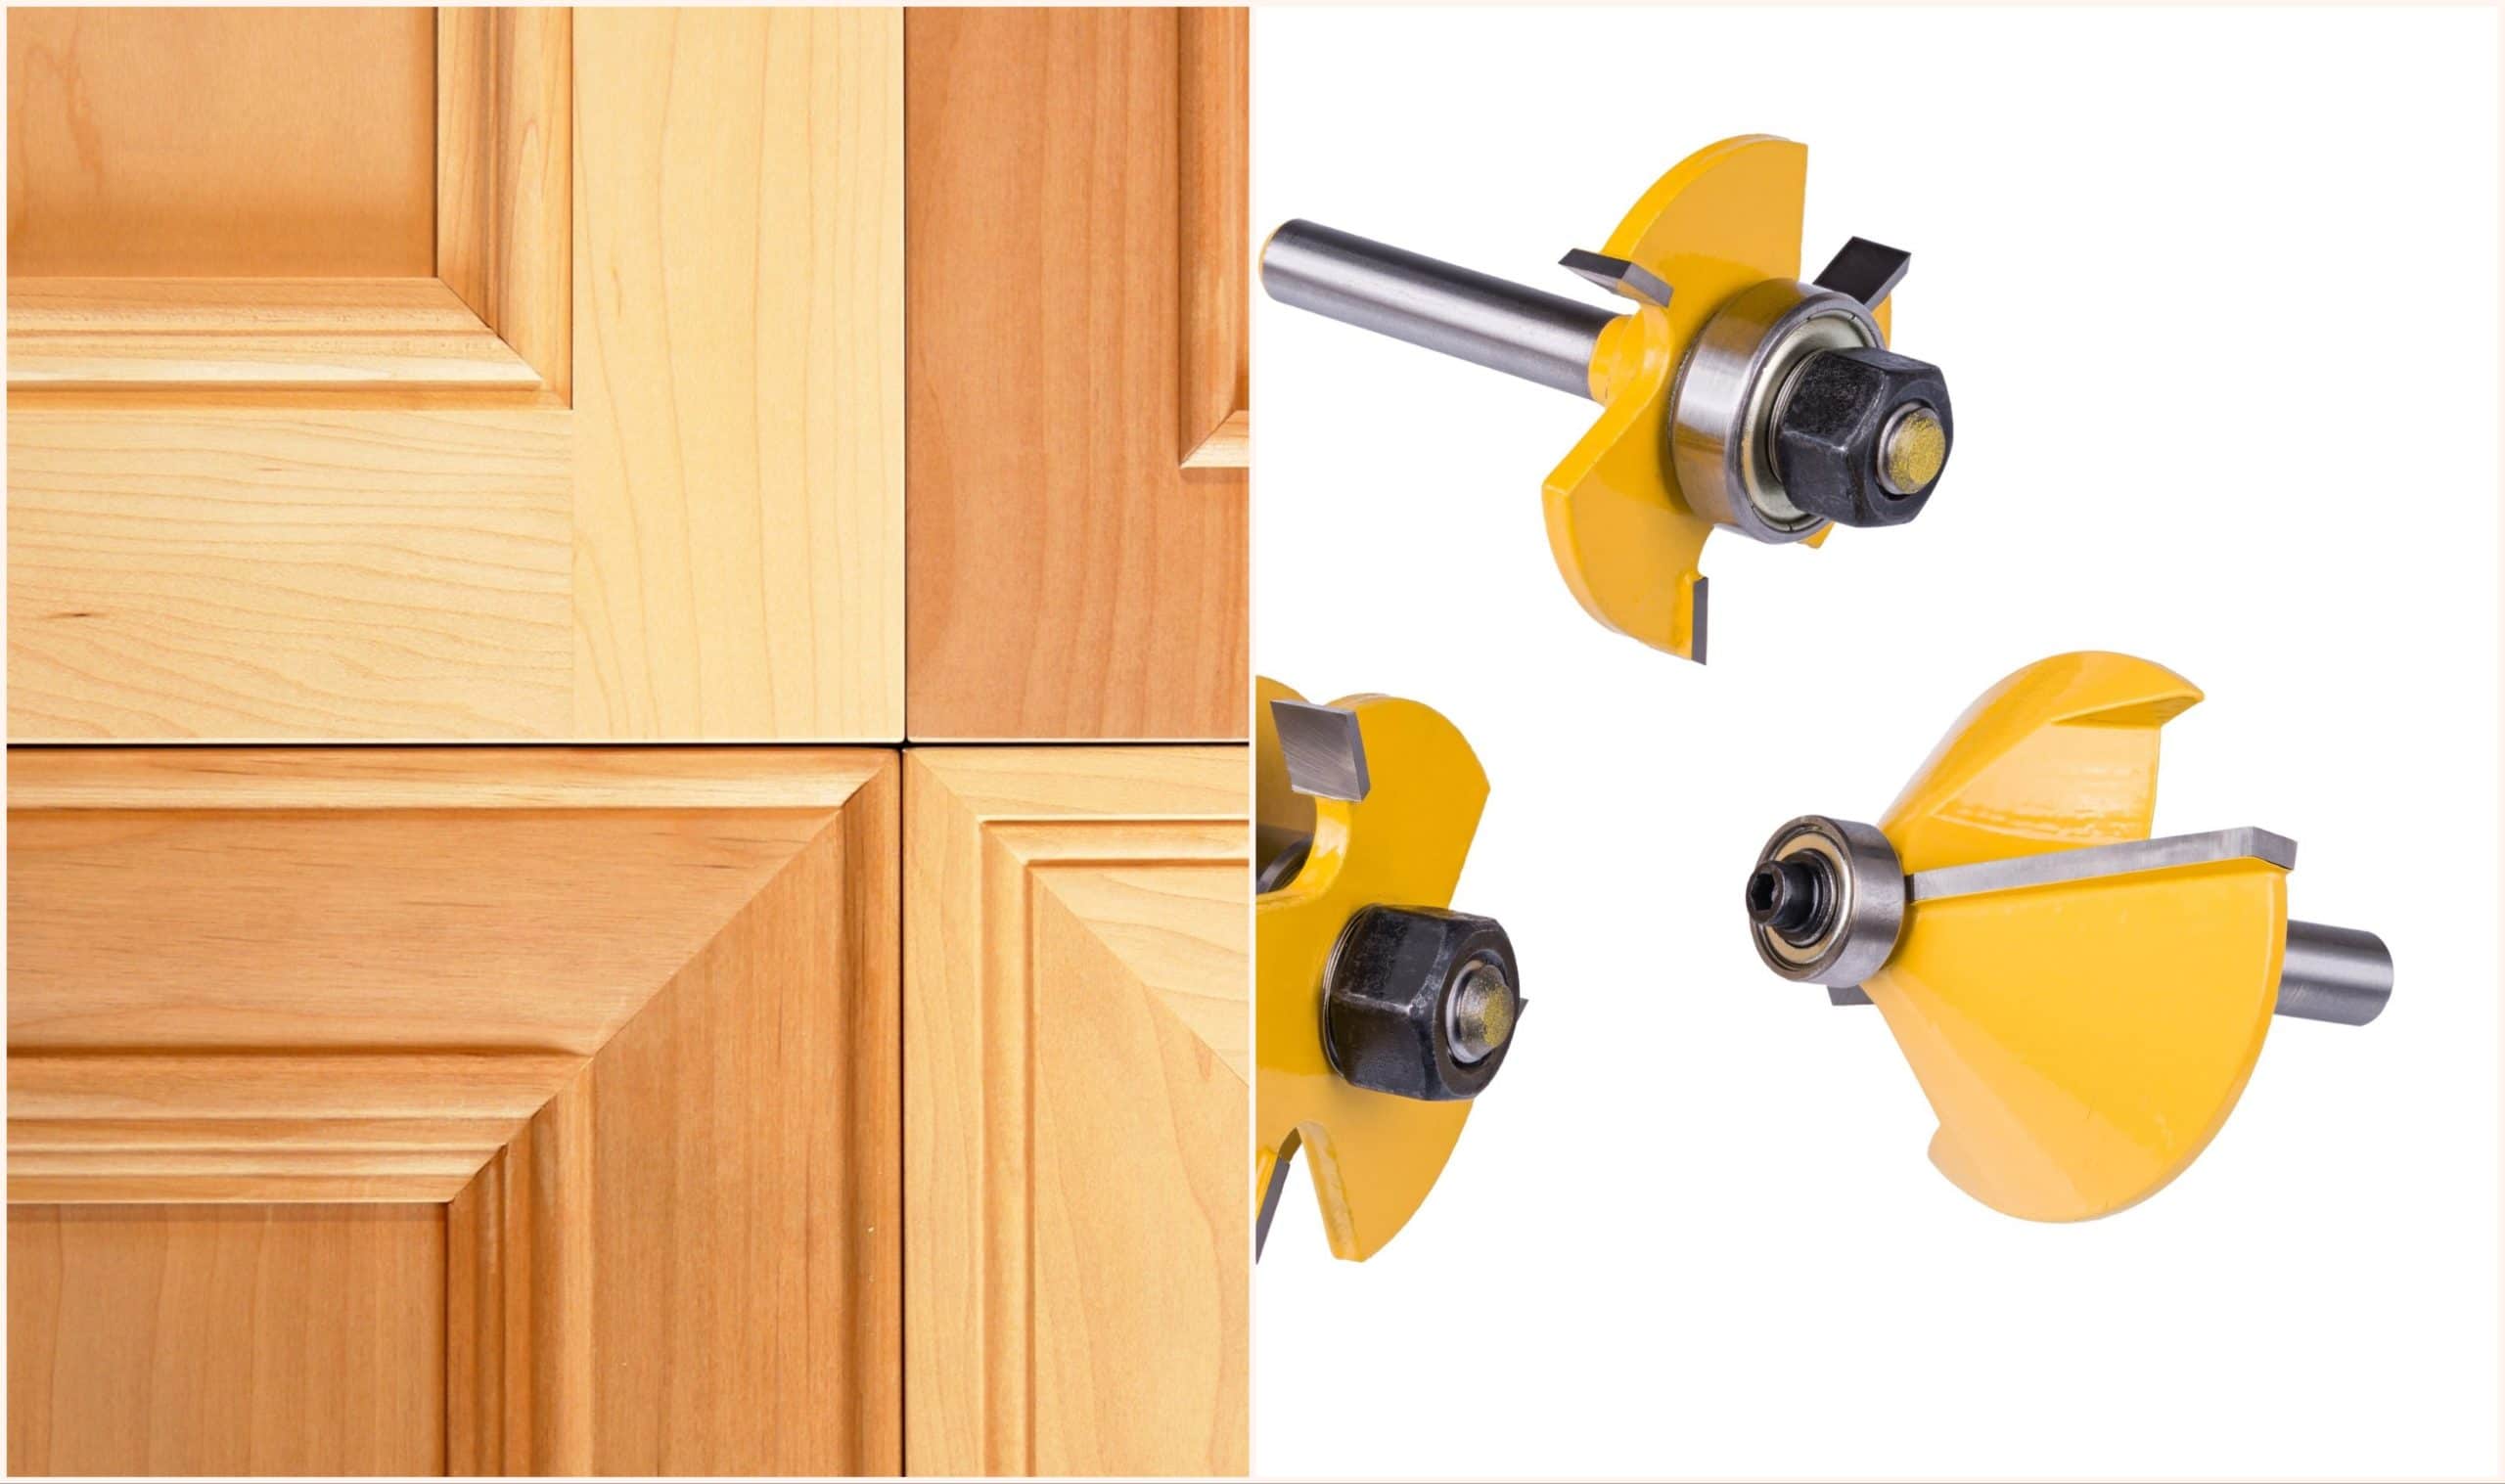 Best Router Bits For Cabinet Doors